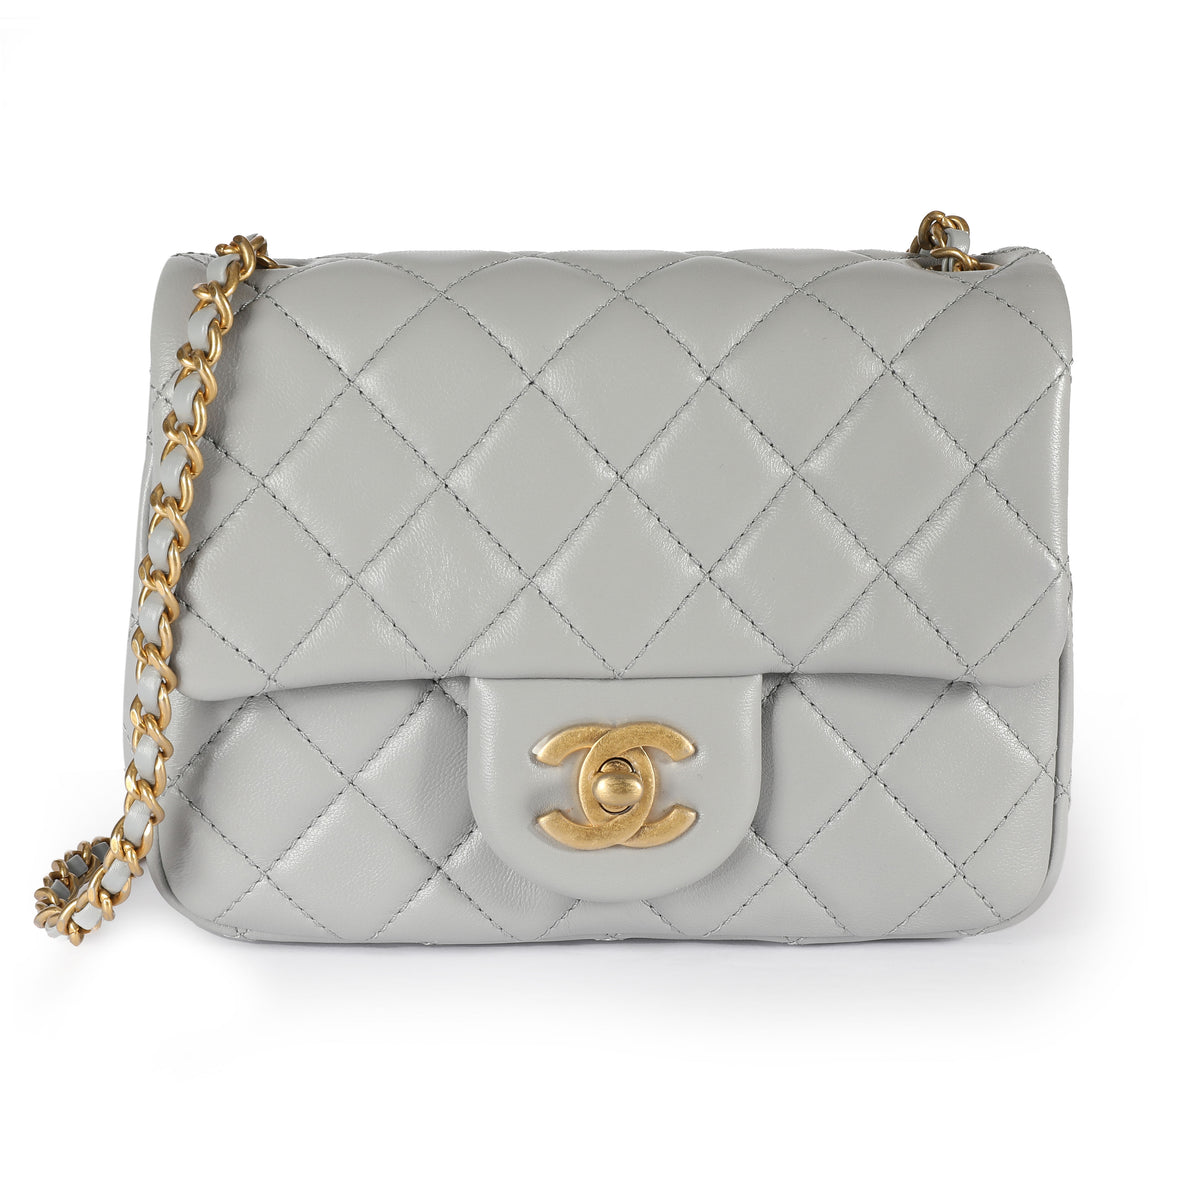 CHANEL Metallic Lambskin Quilted Micro Coco Crush Bag Gold 812728